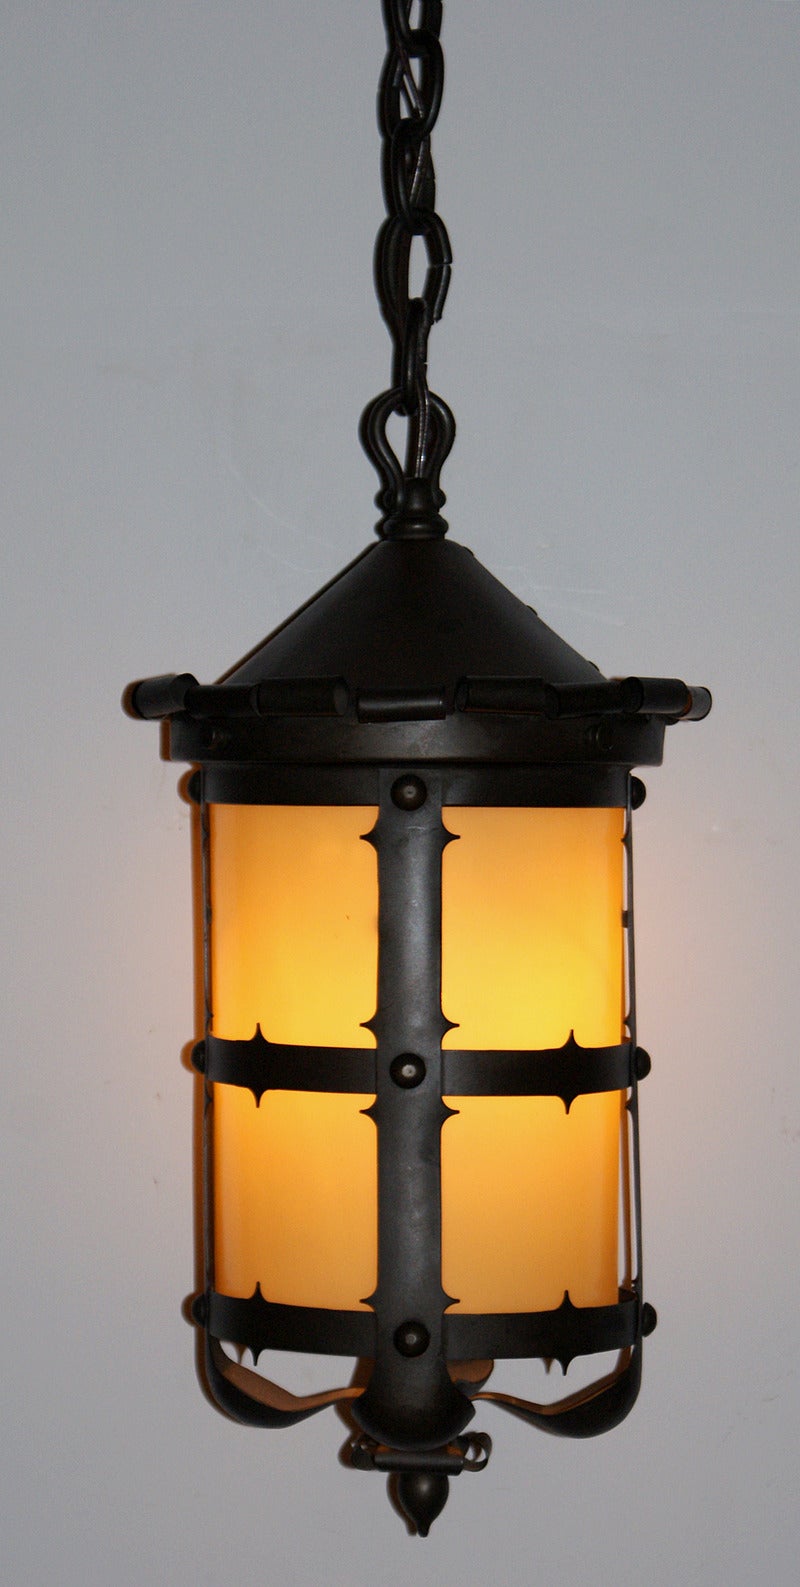 First quarter of the 20th century Arts and Crafts style pendant lantern having custard glass interior shade. The lantern measures 18.25